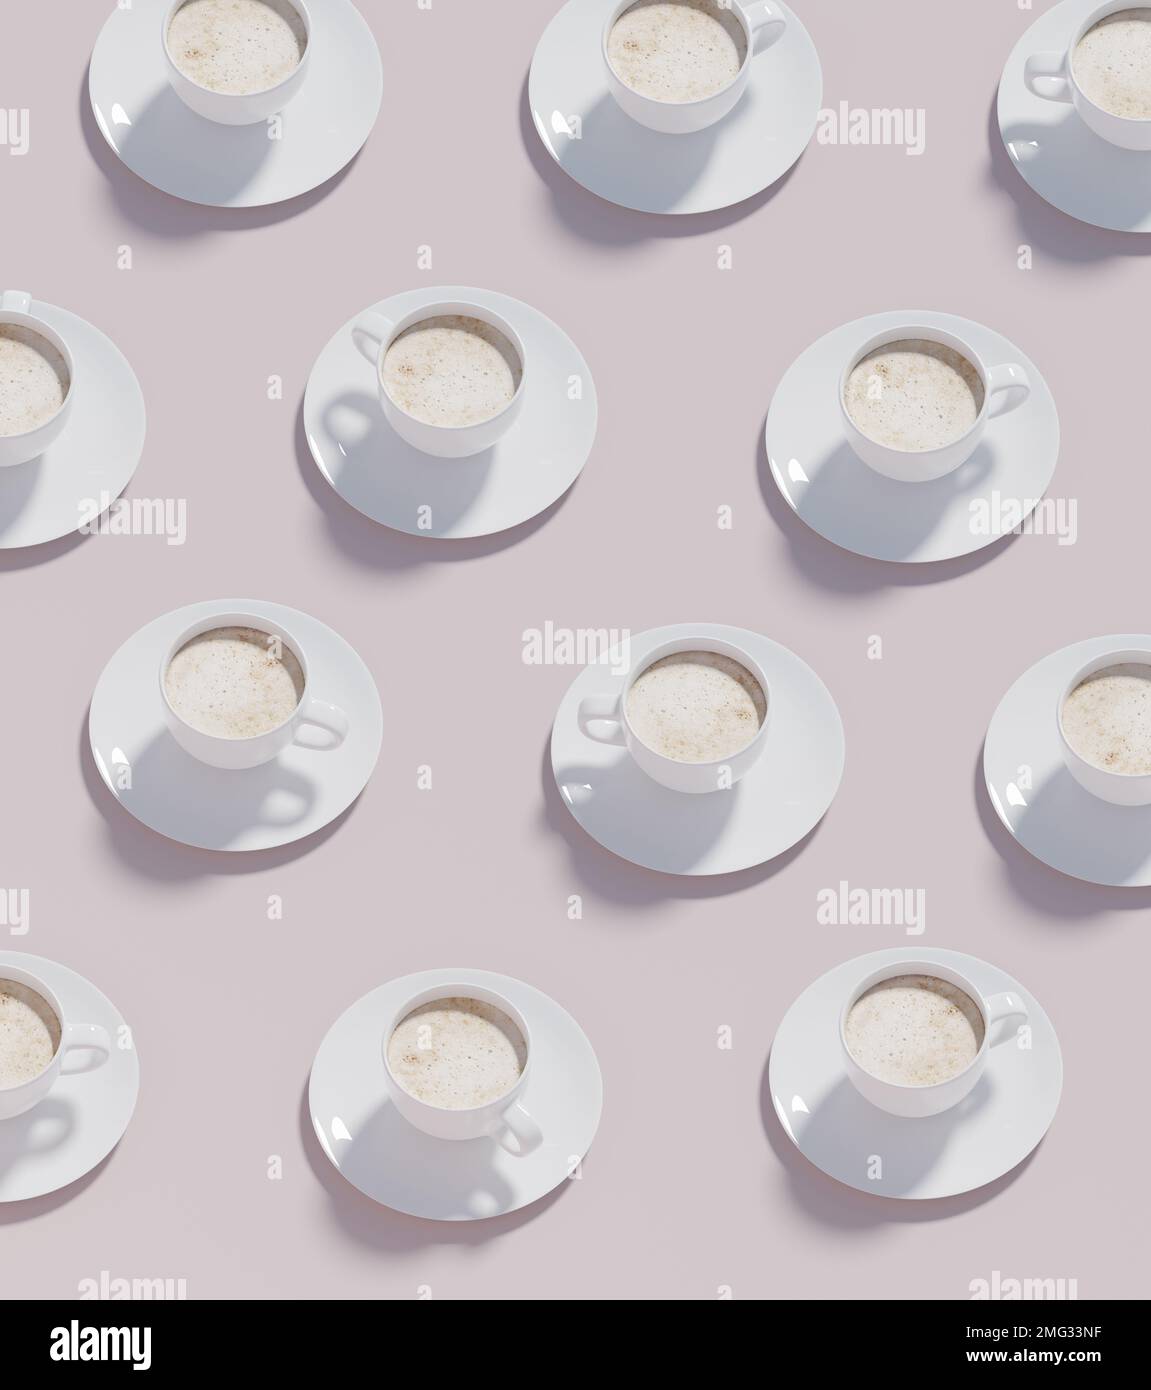 Pattern of coffee cups in tan pastel background, 3d rendering. Coffee culture cappuccino drinks, daily caffeine consumption Stock Photo